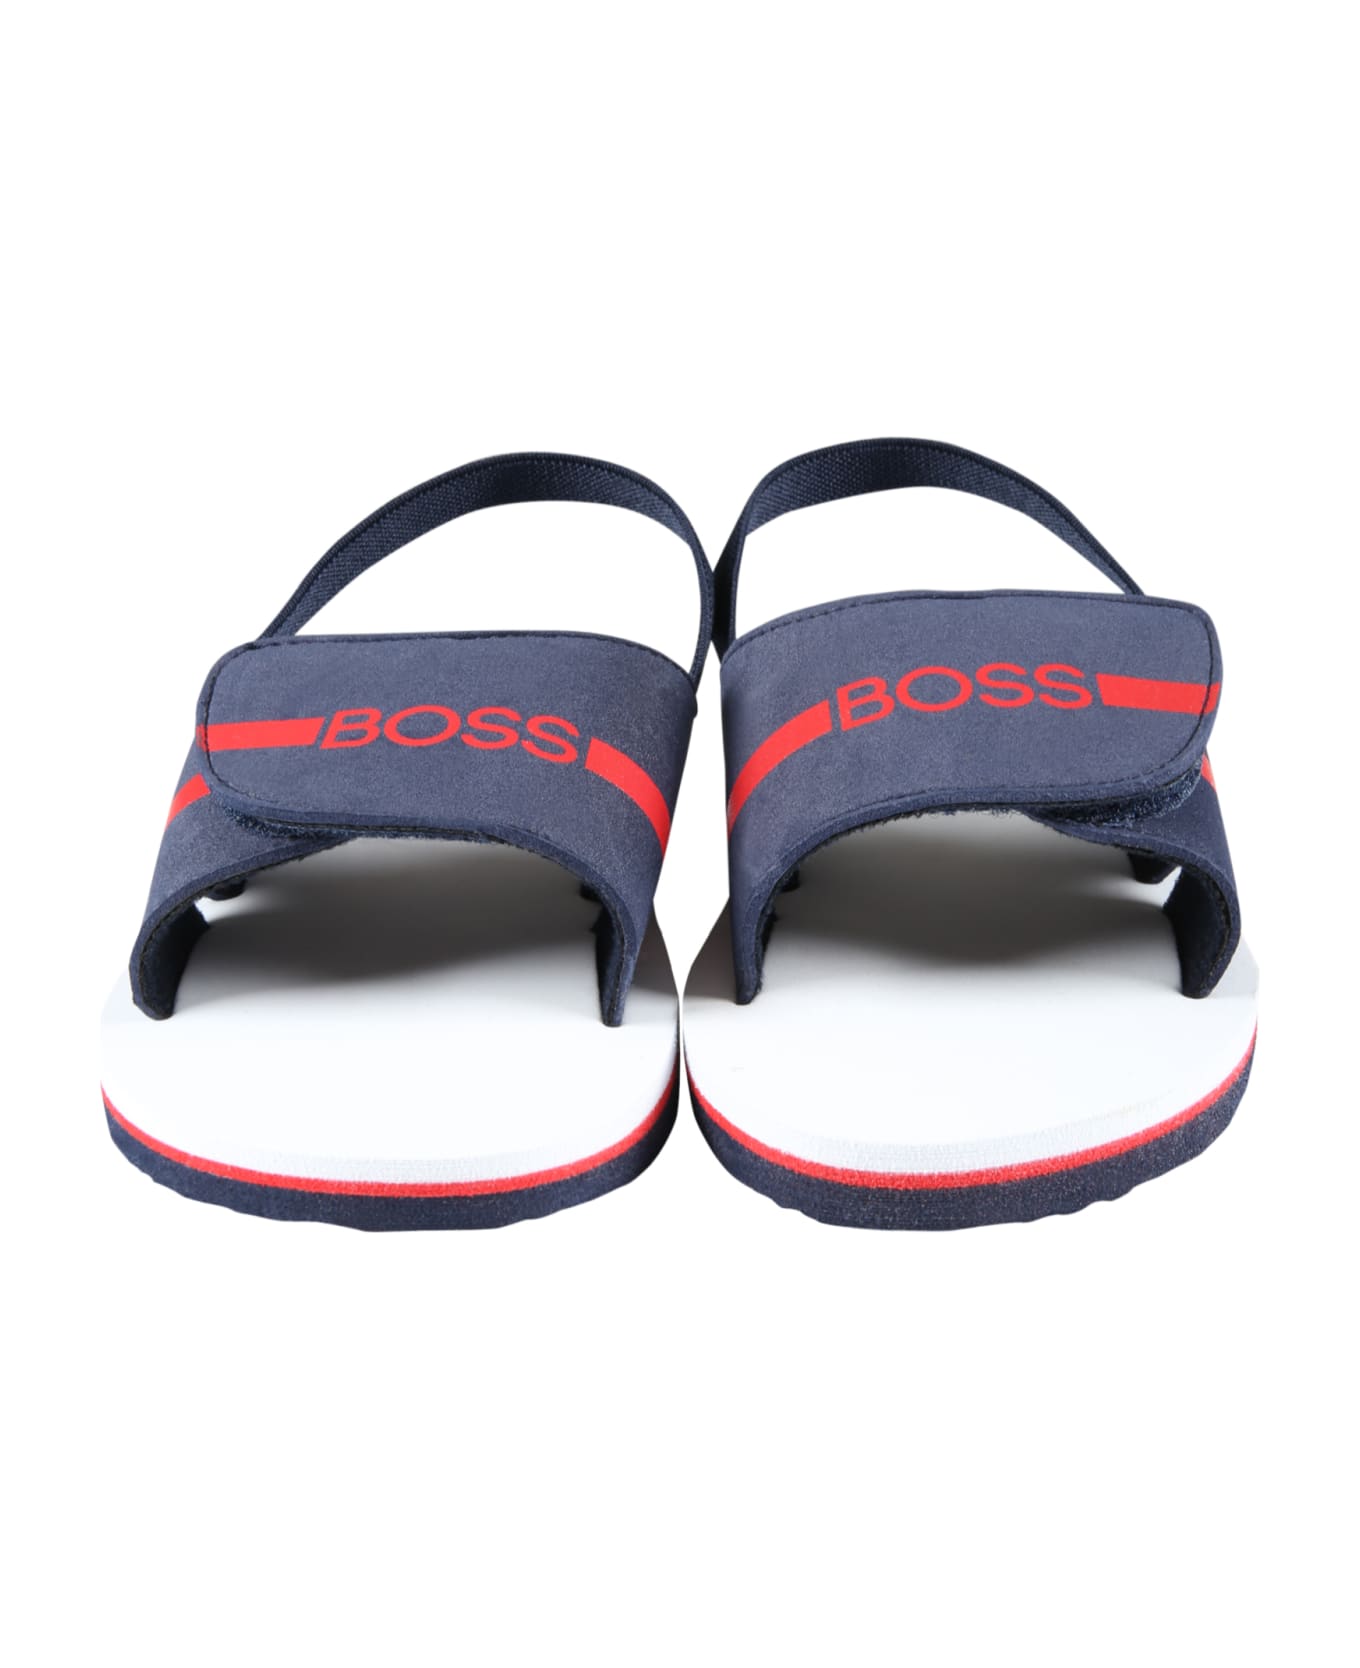 Hugo Boss Blue Sandals For Boy With Red Logo - Blue